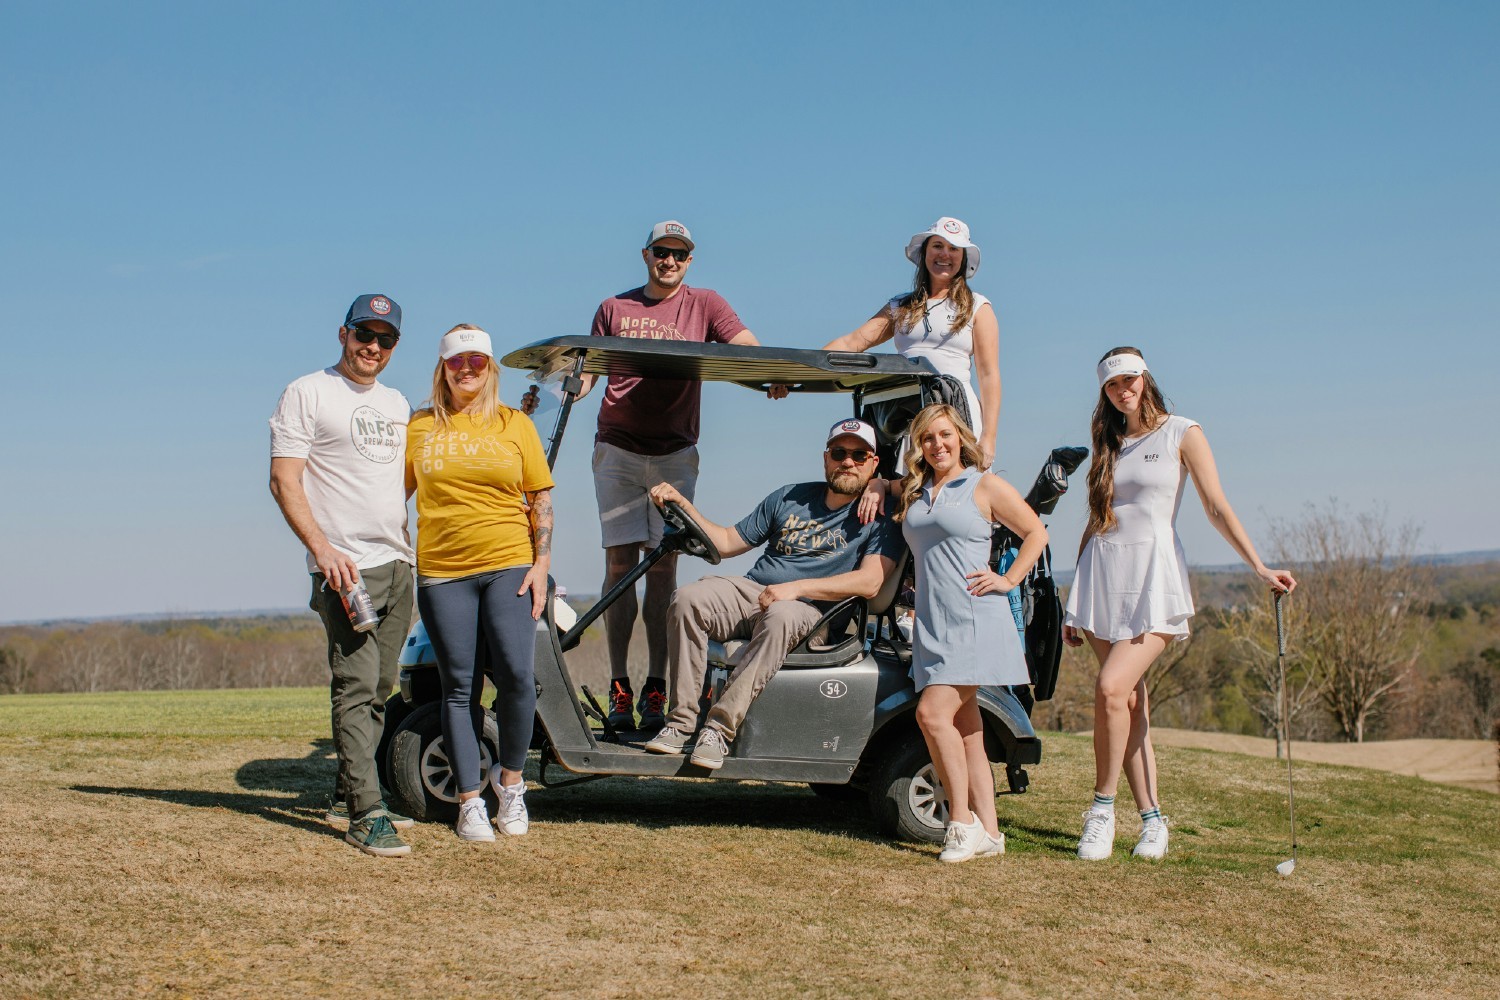 Supporting a local golf course at Country Land, our team did a photoshoot for our new merch to celebrate the Masters. 